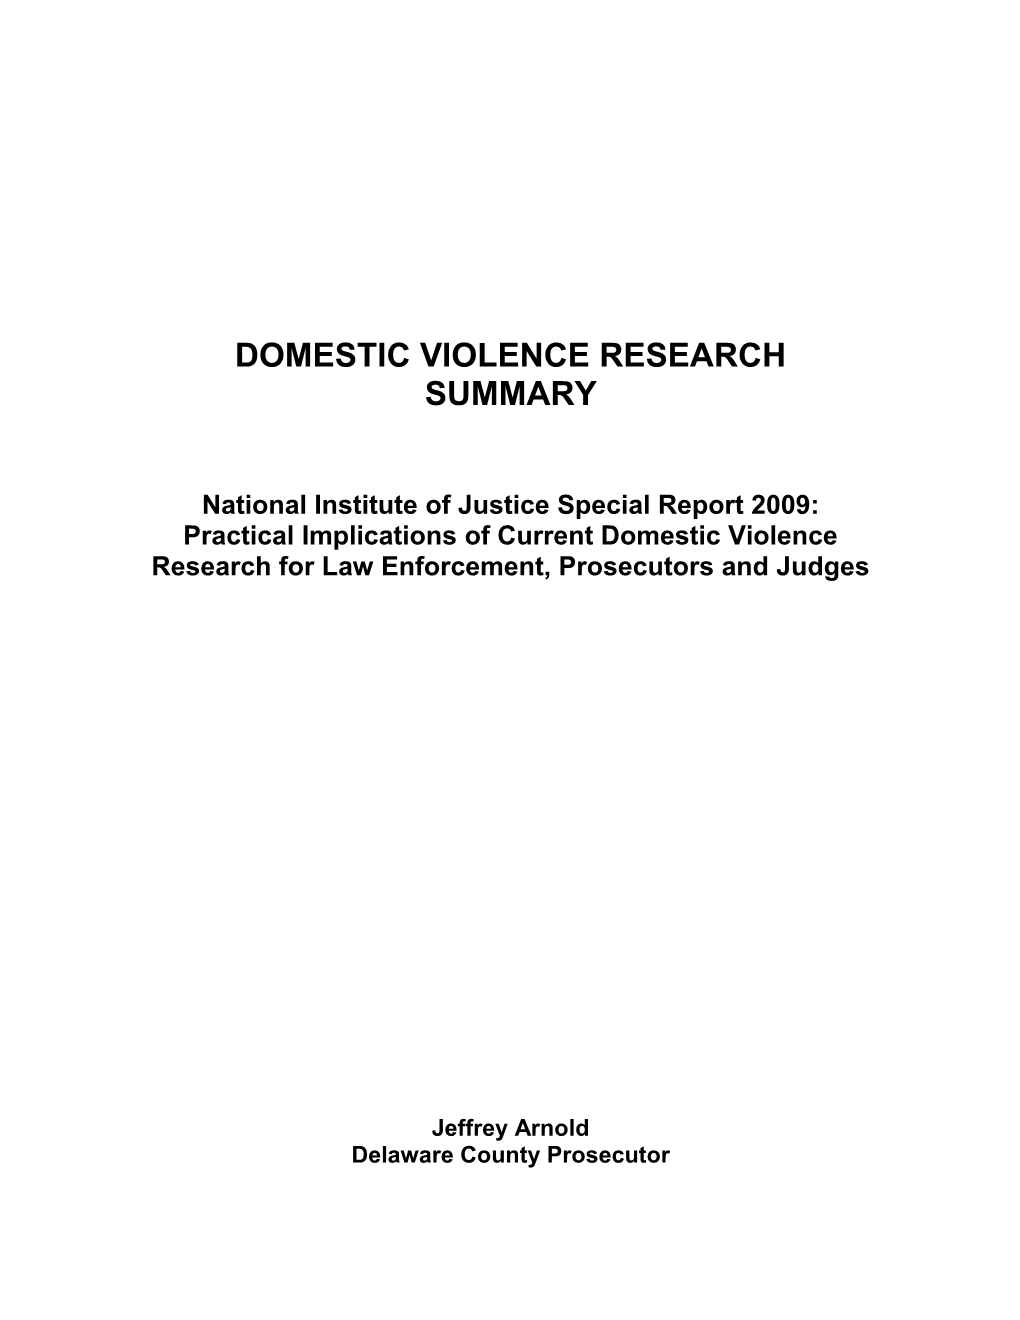 Delaware County Domestic Violence Committee